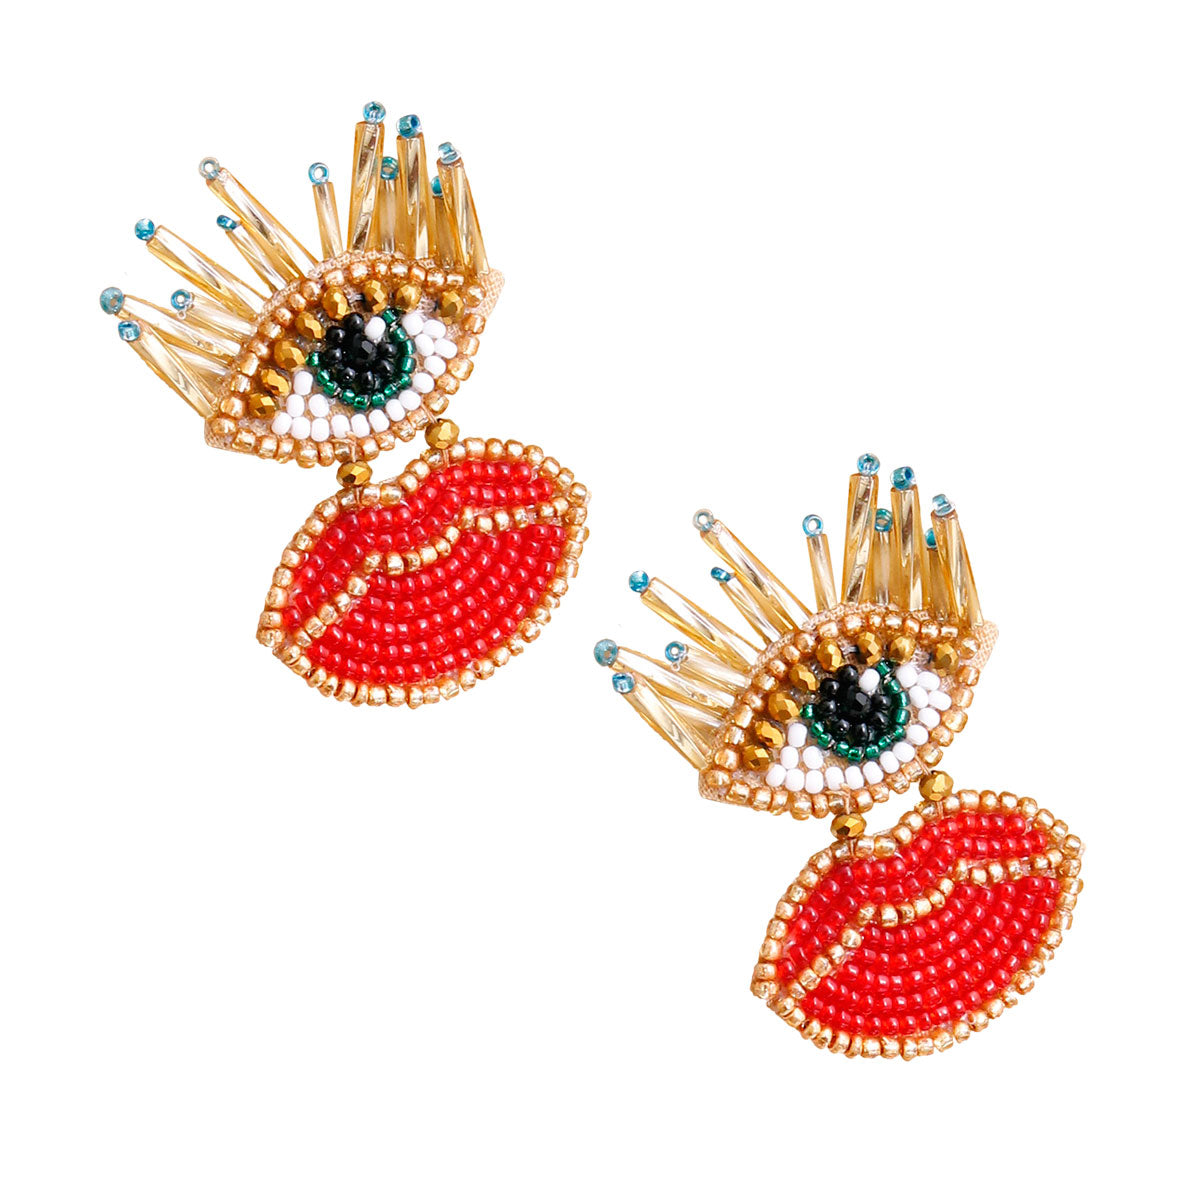 Embroidered Lips and Eyes Earrings